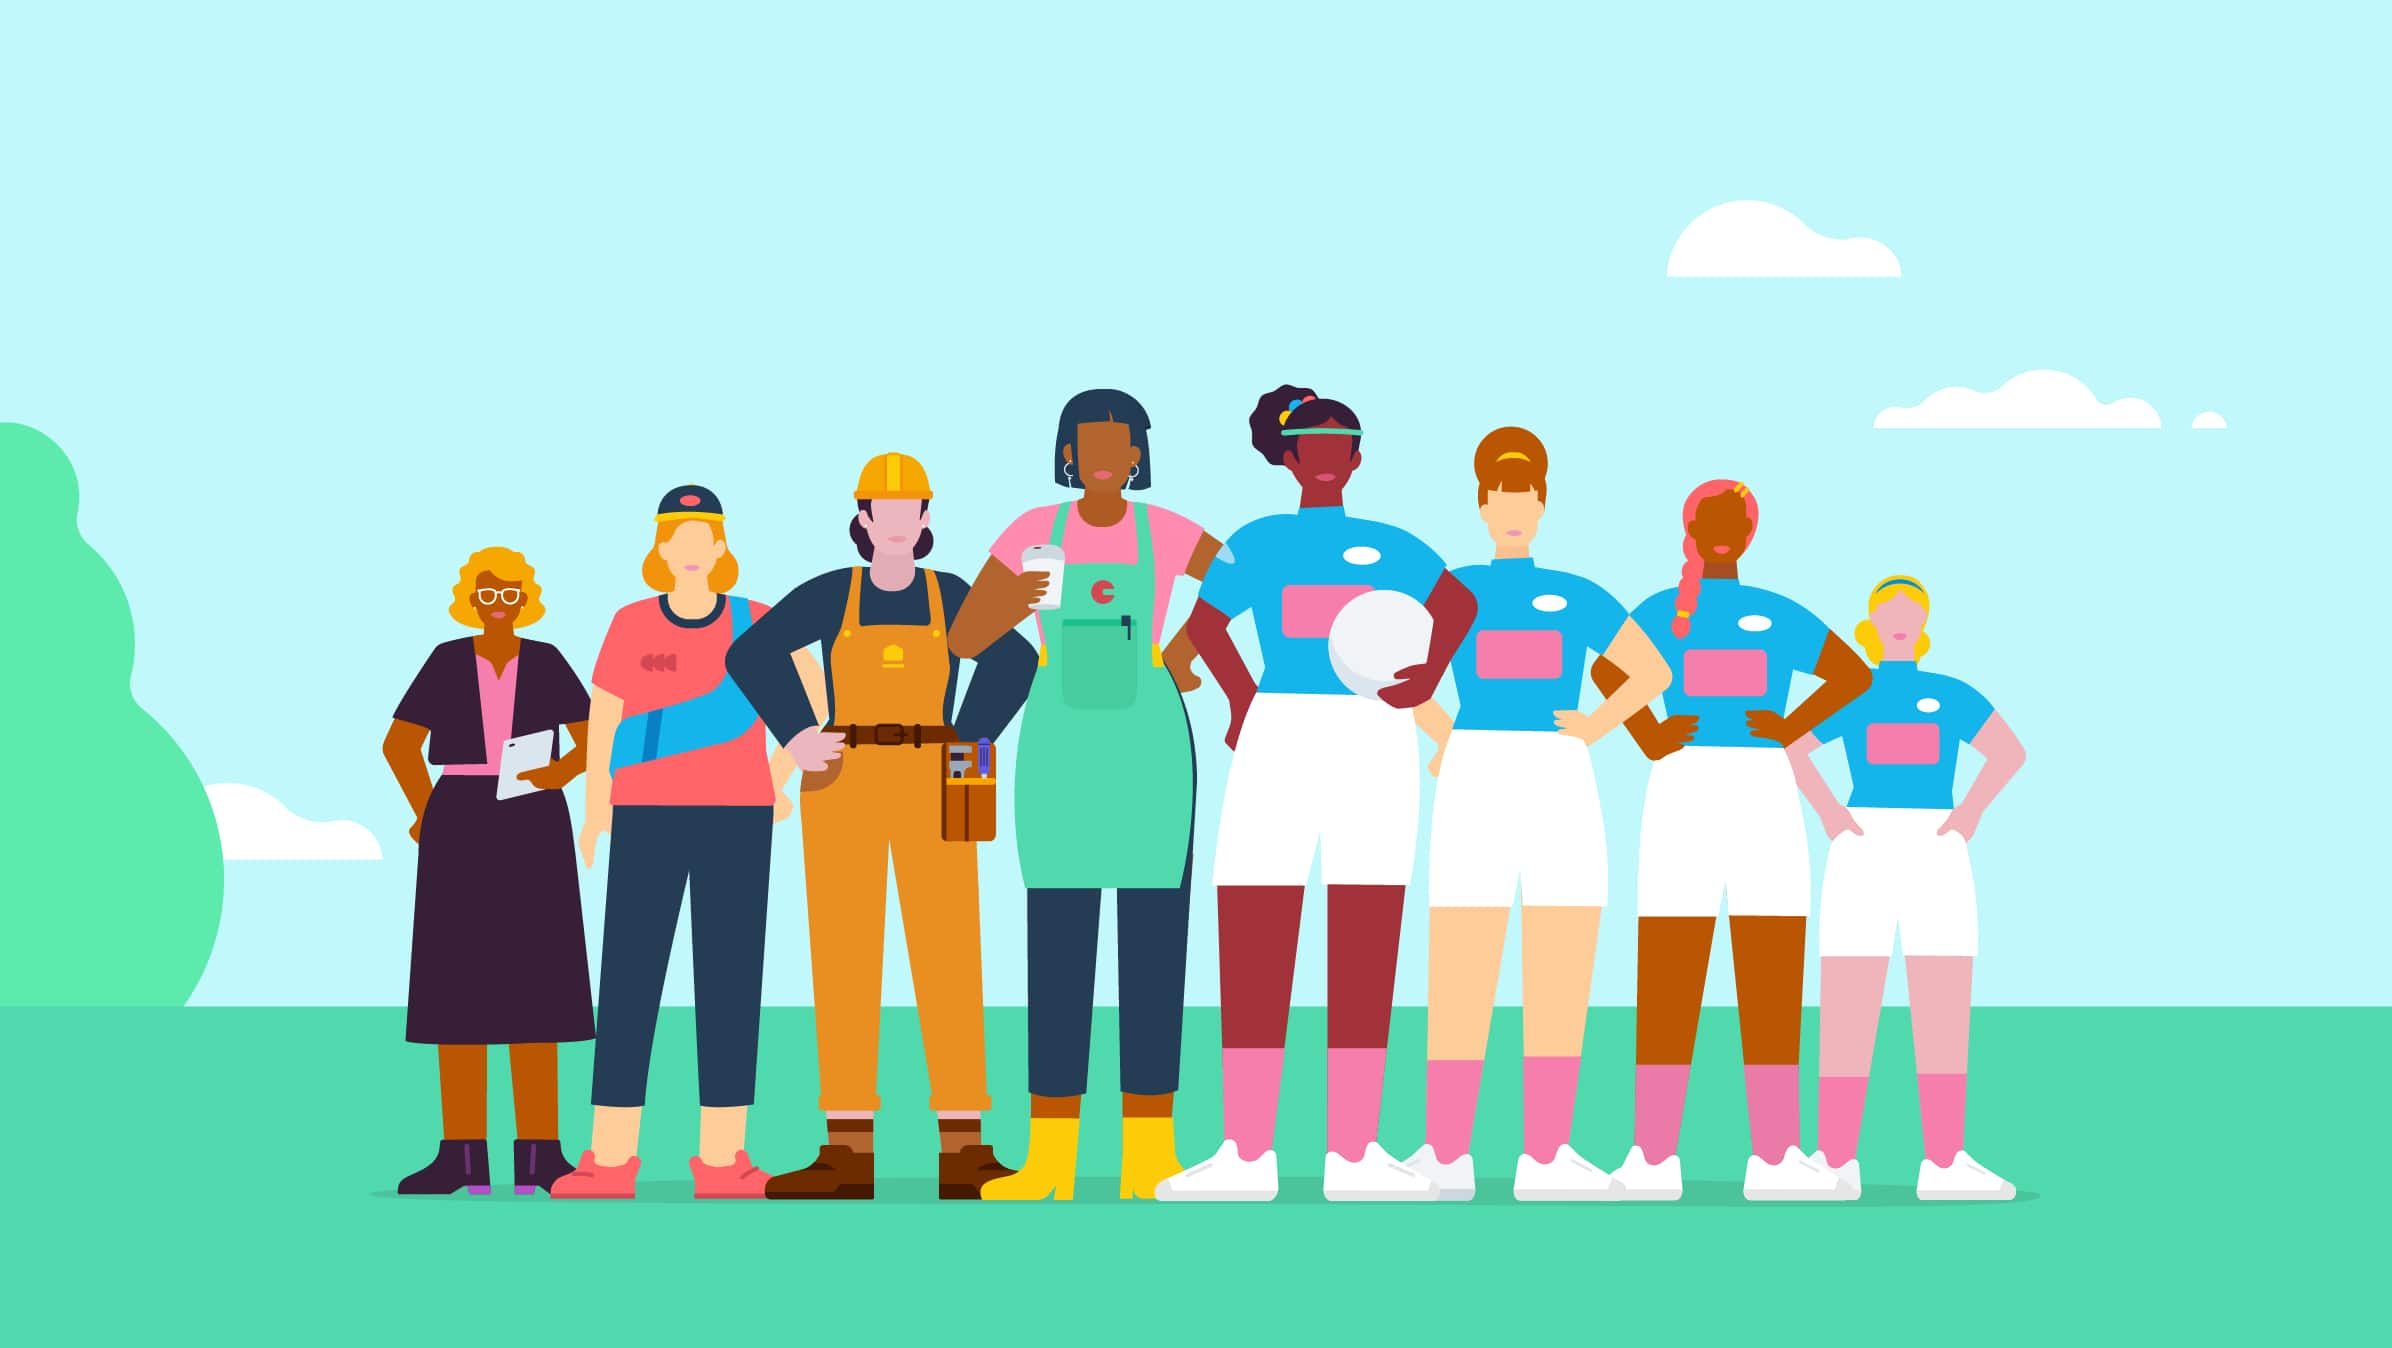 An illustration of a group of female small business owners and female football players standing together